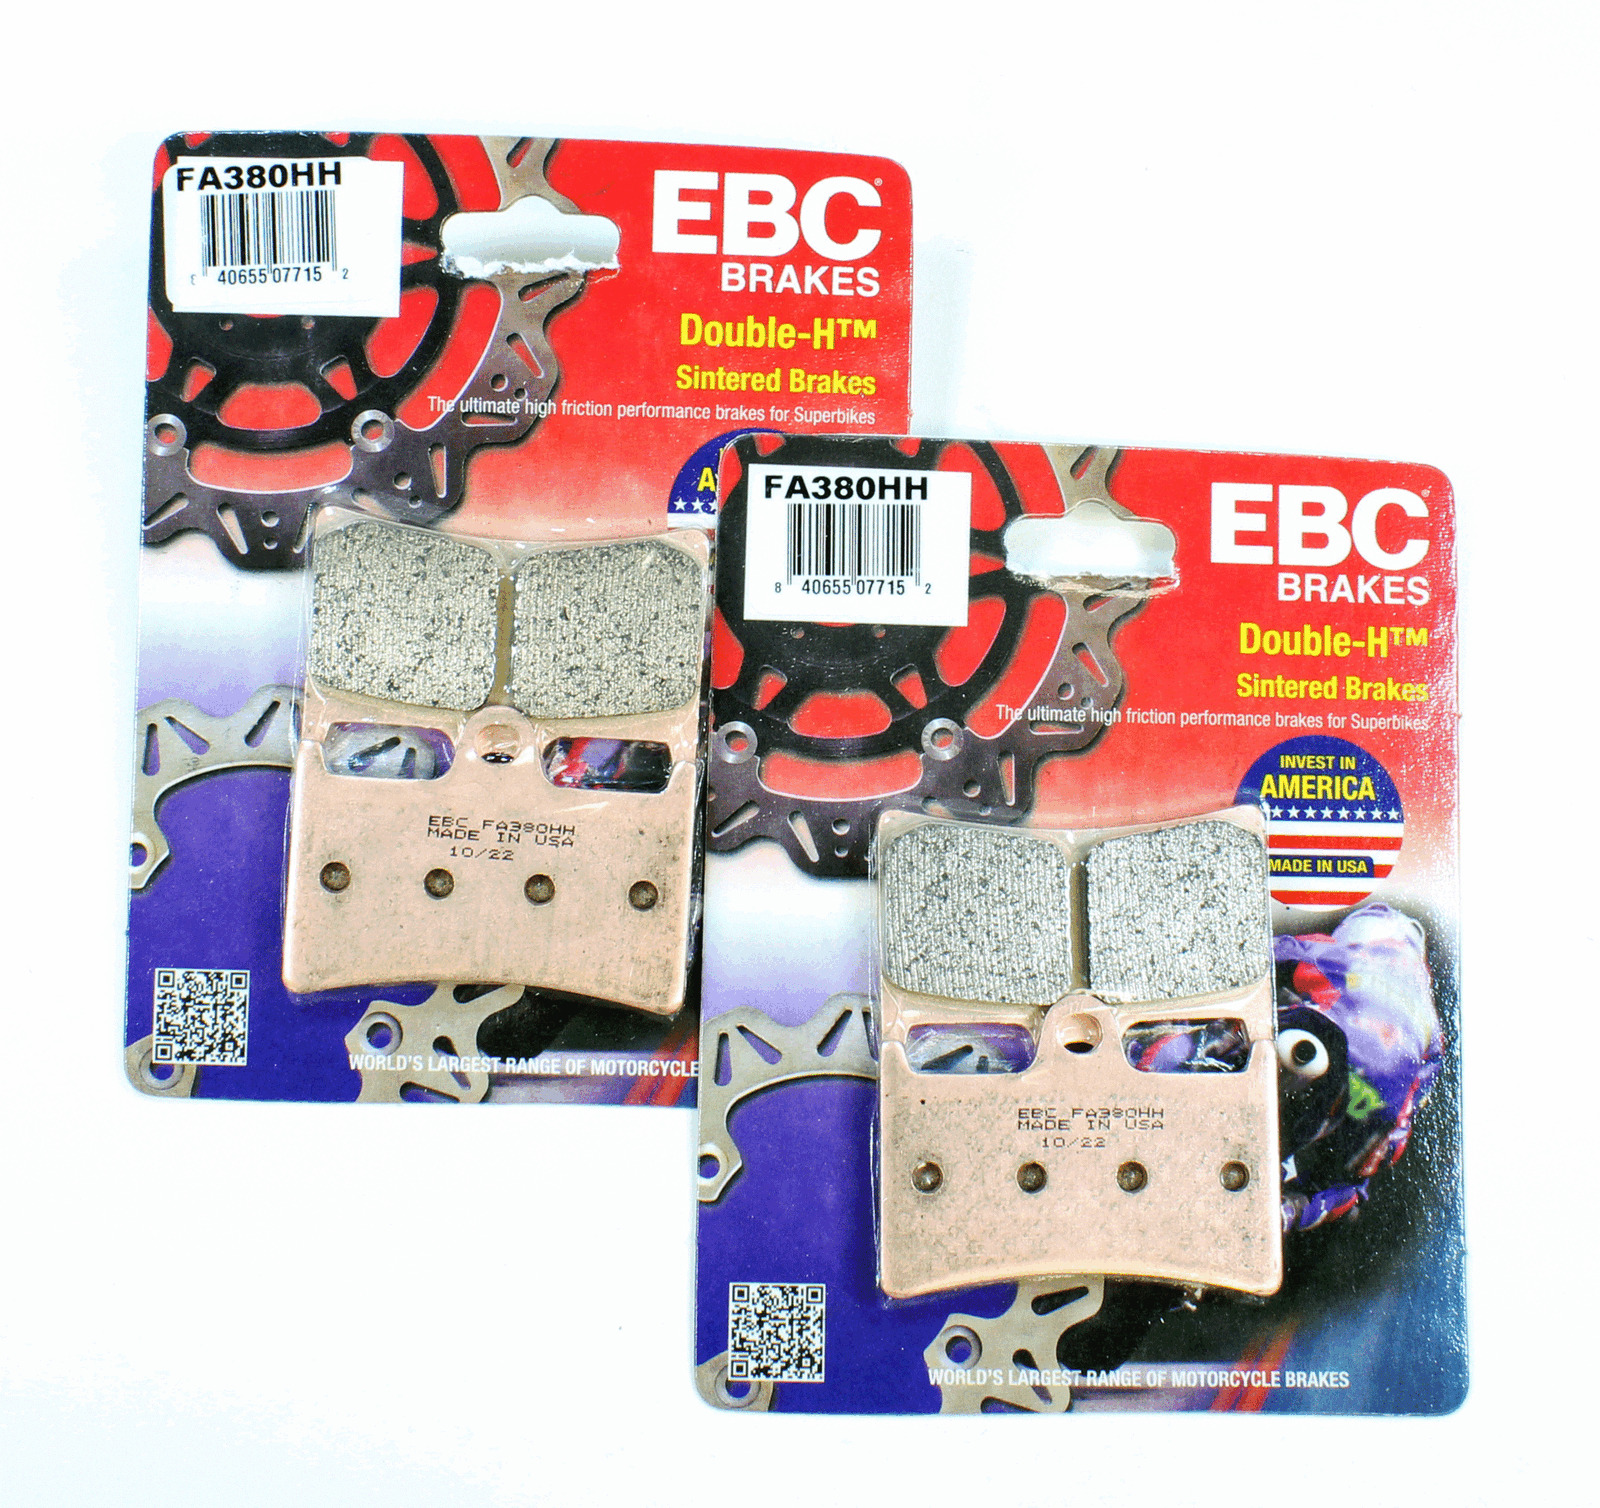 EBC Brake Pads HH Sintered Pads for 2005-2016 Yamaha YZF R6 YZFR6 600 Front